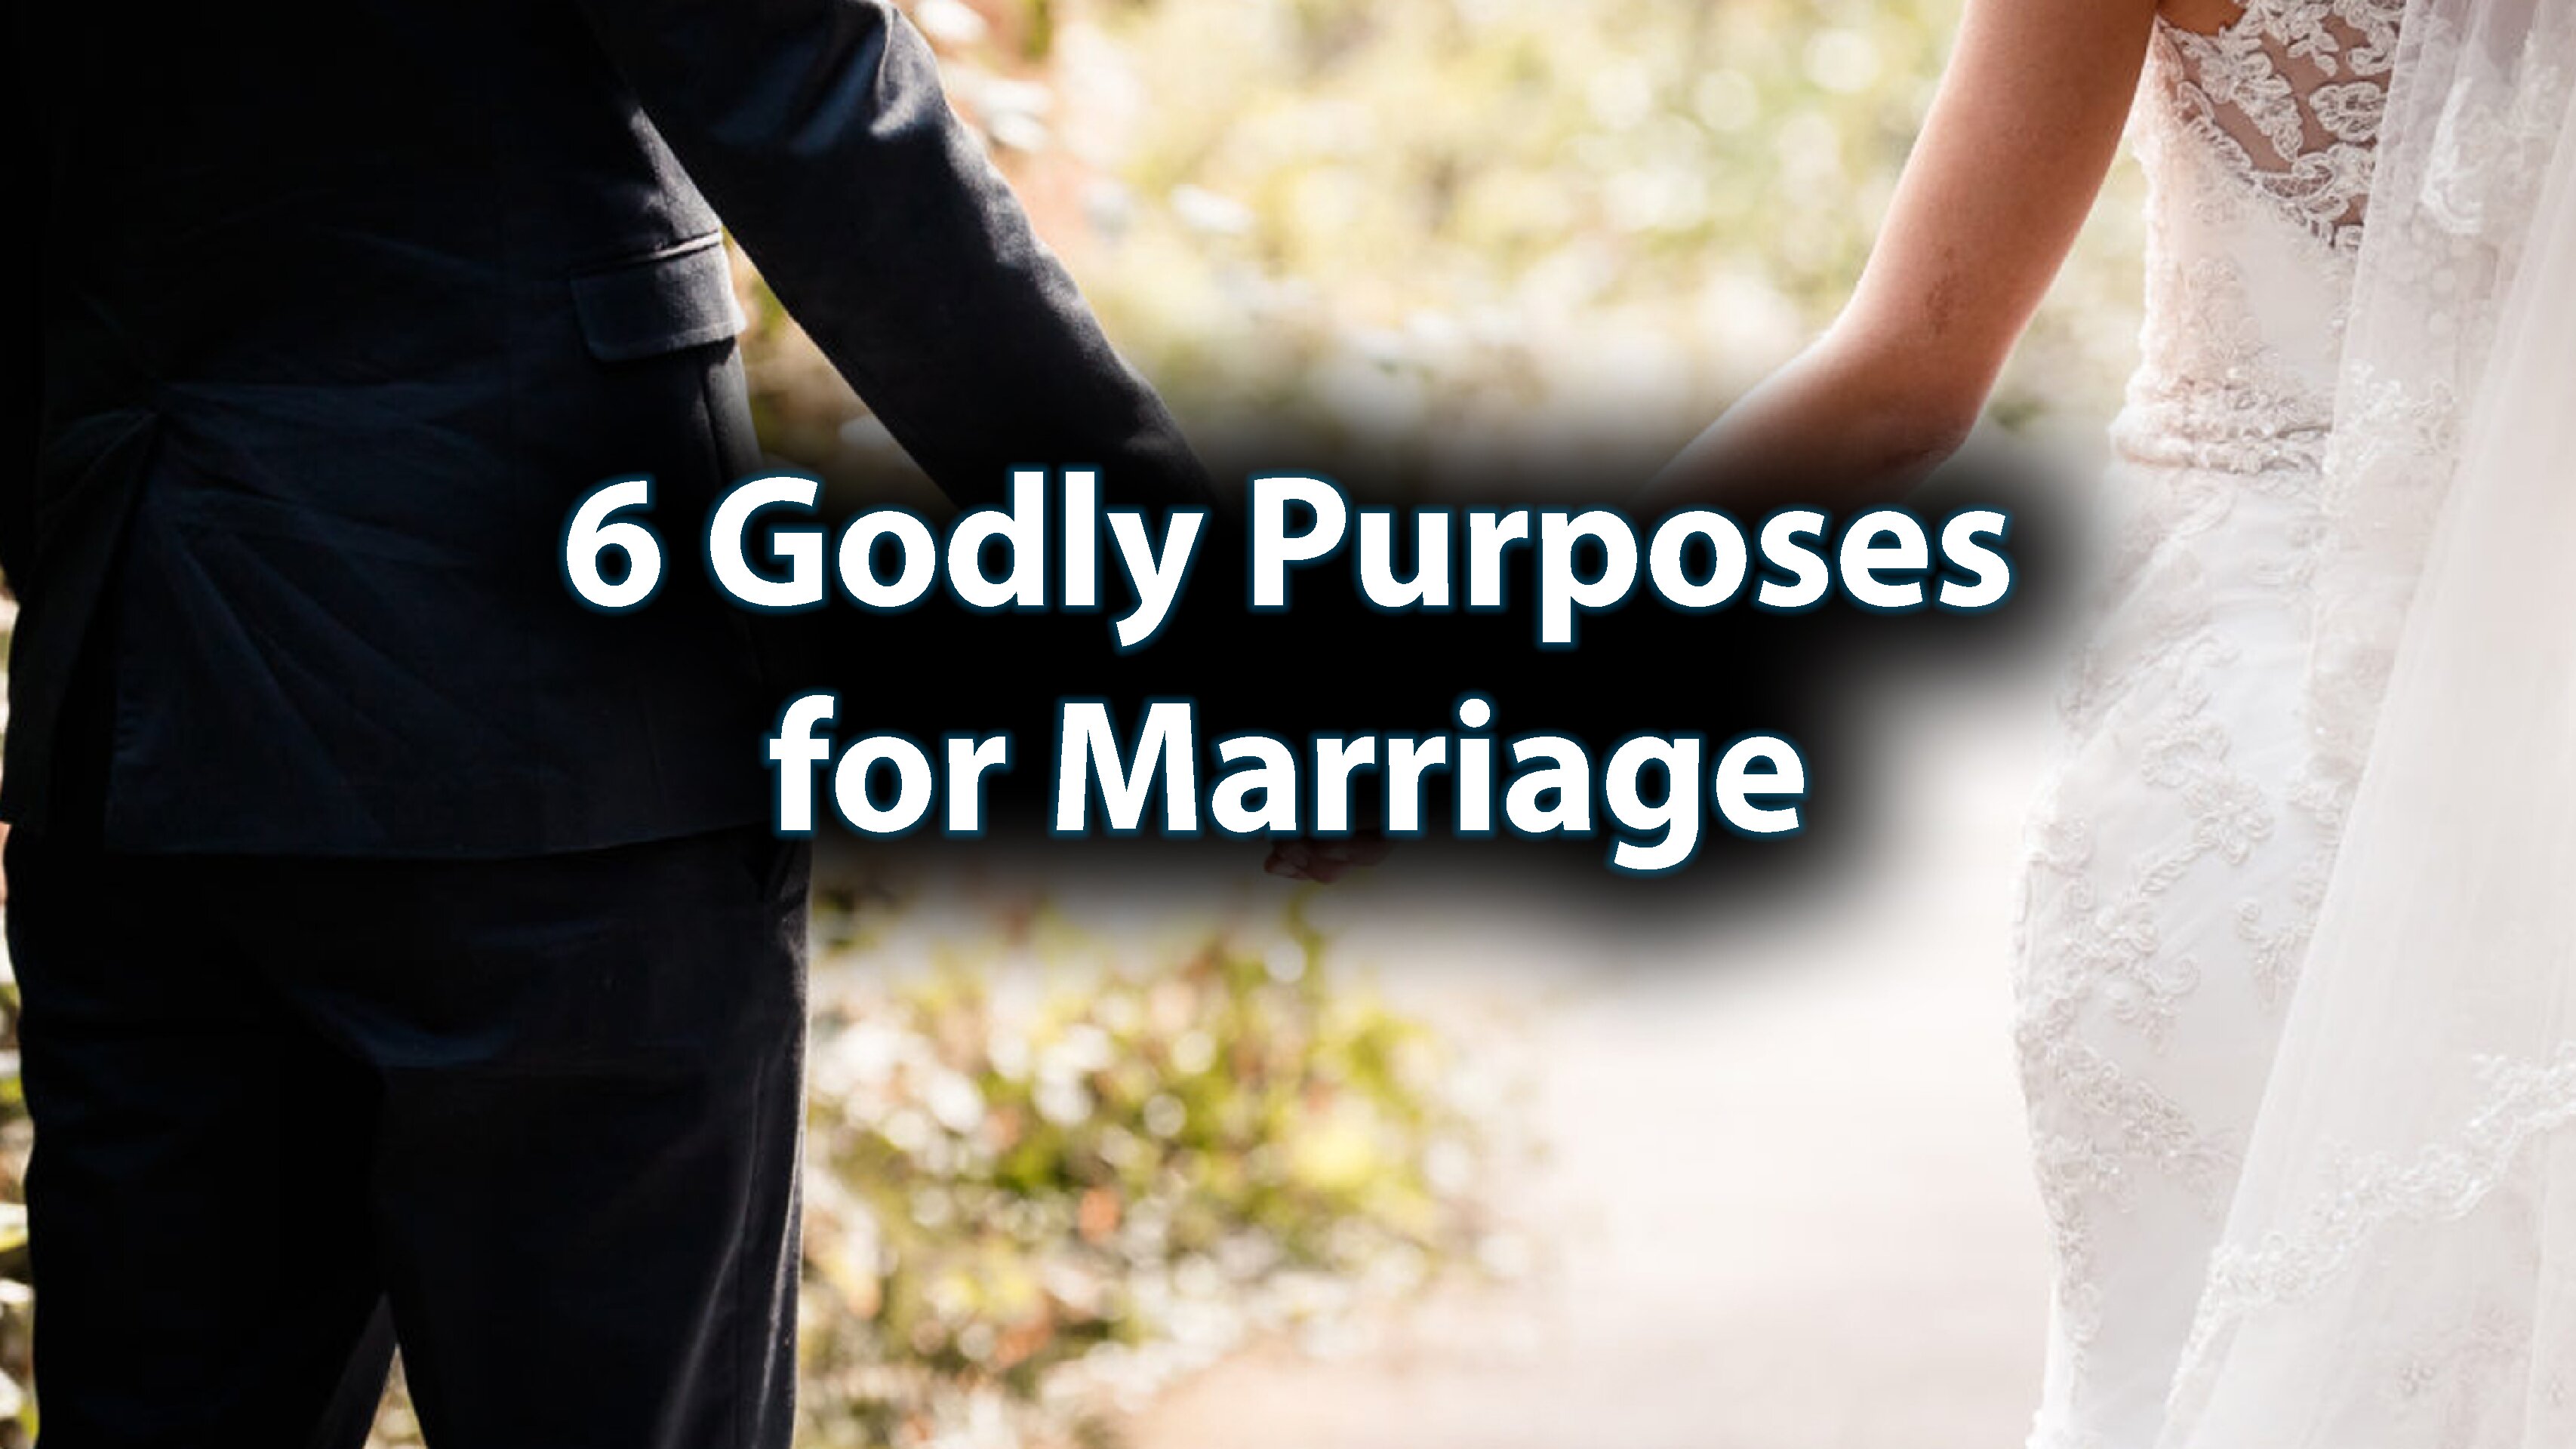 Day 30: 6 Godly Purposes for Marriage